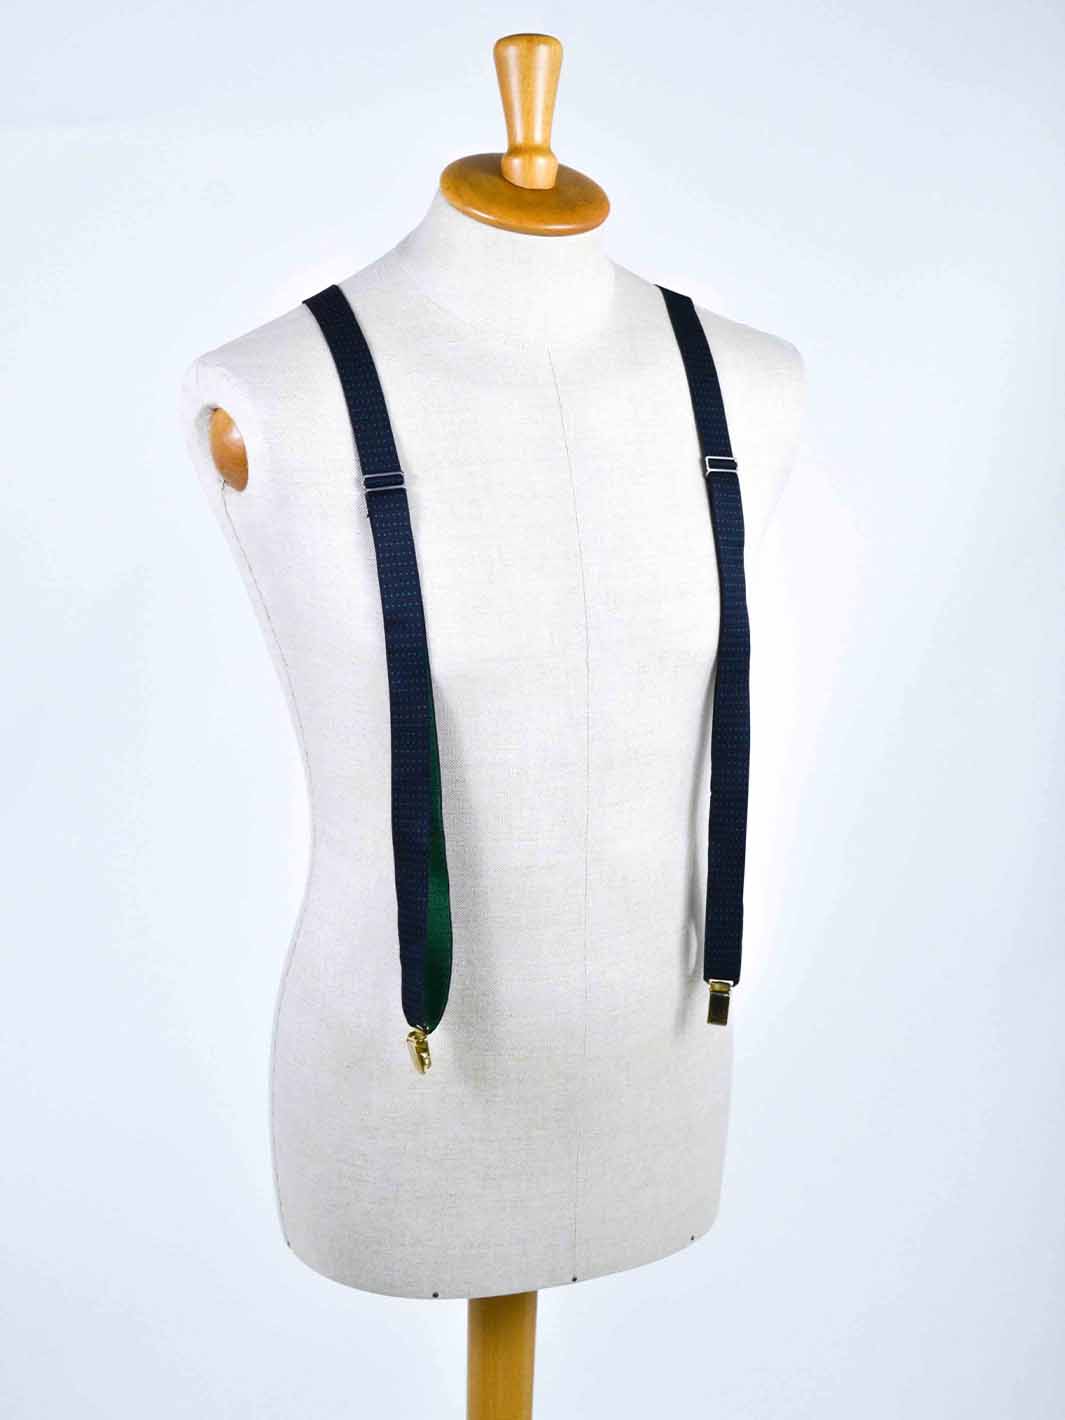 1990s green and blue suspenders